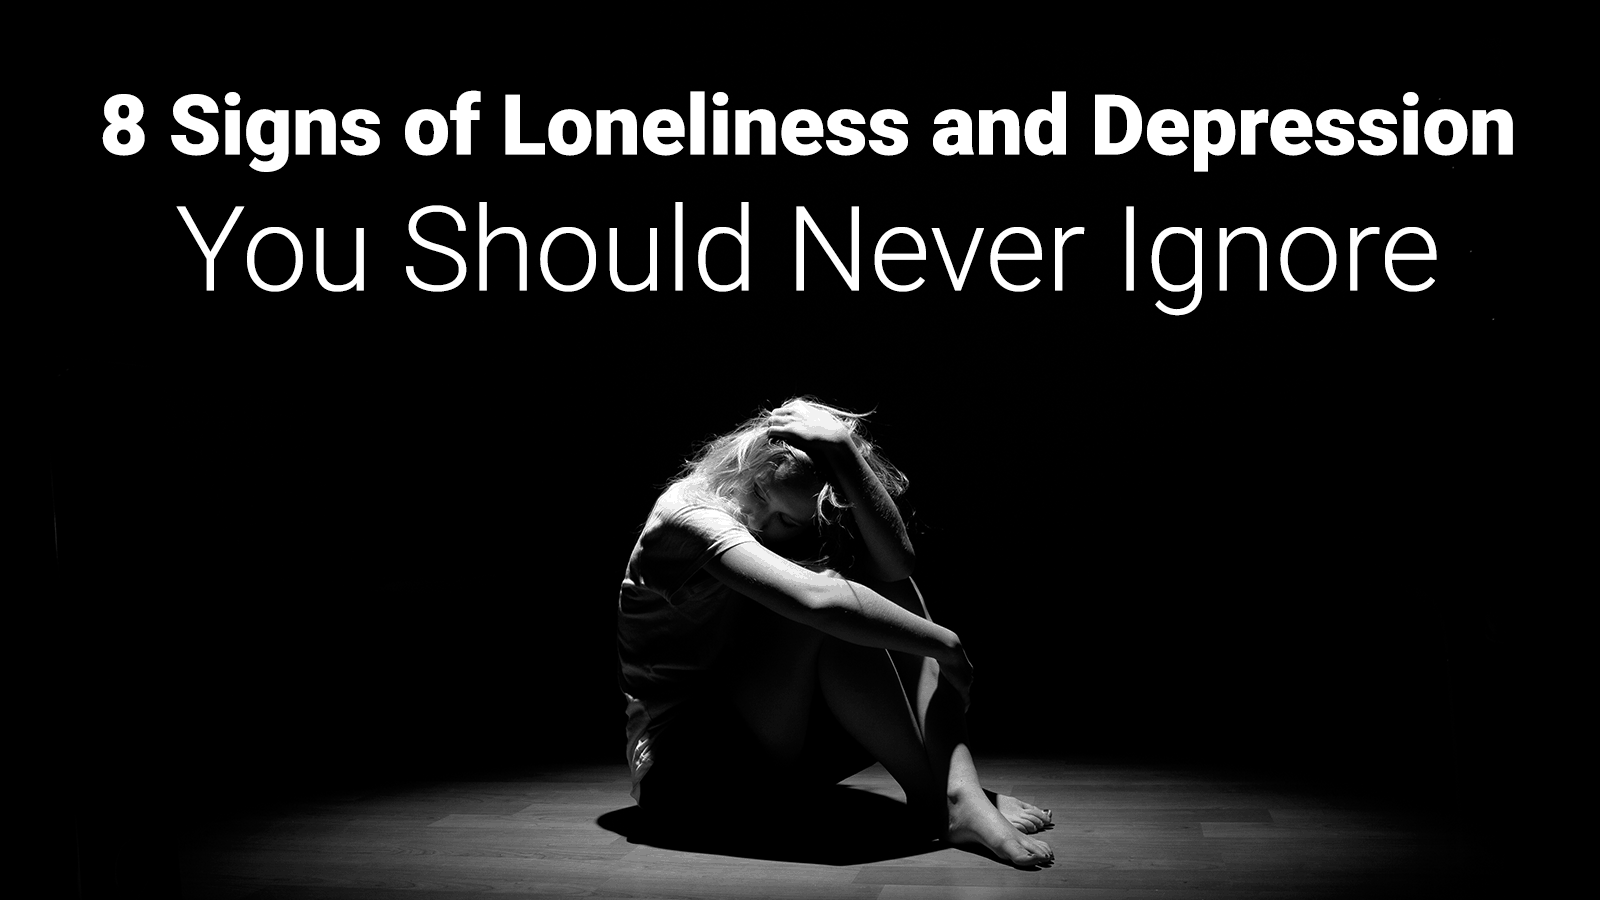 loneliness in society essay